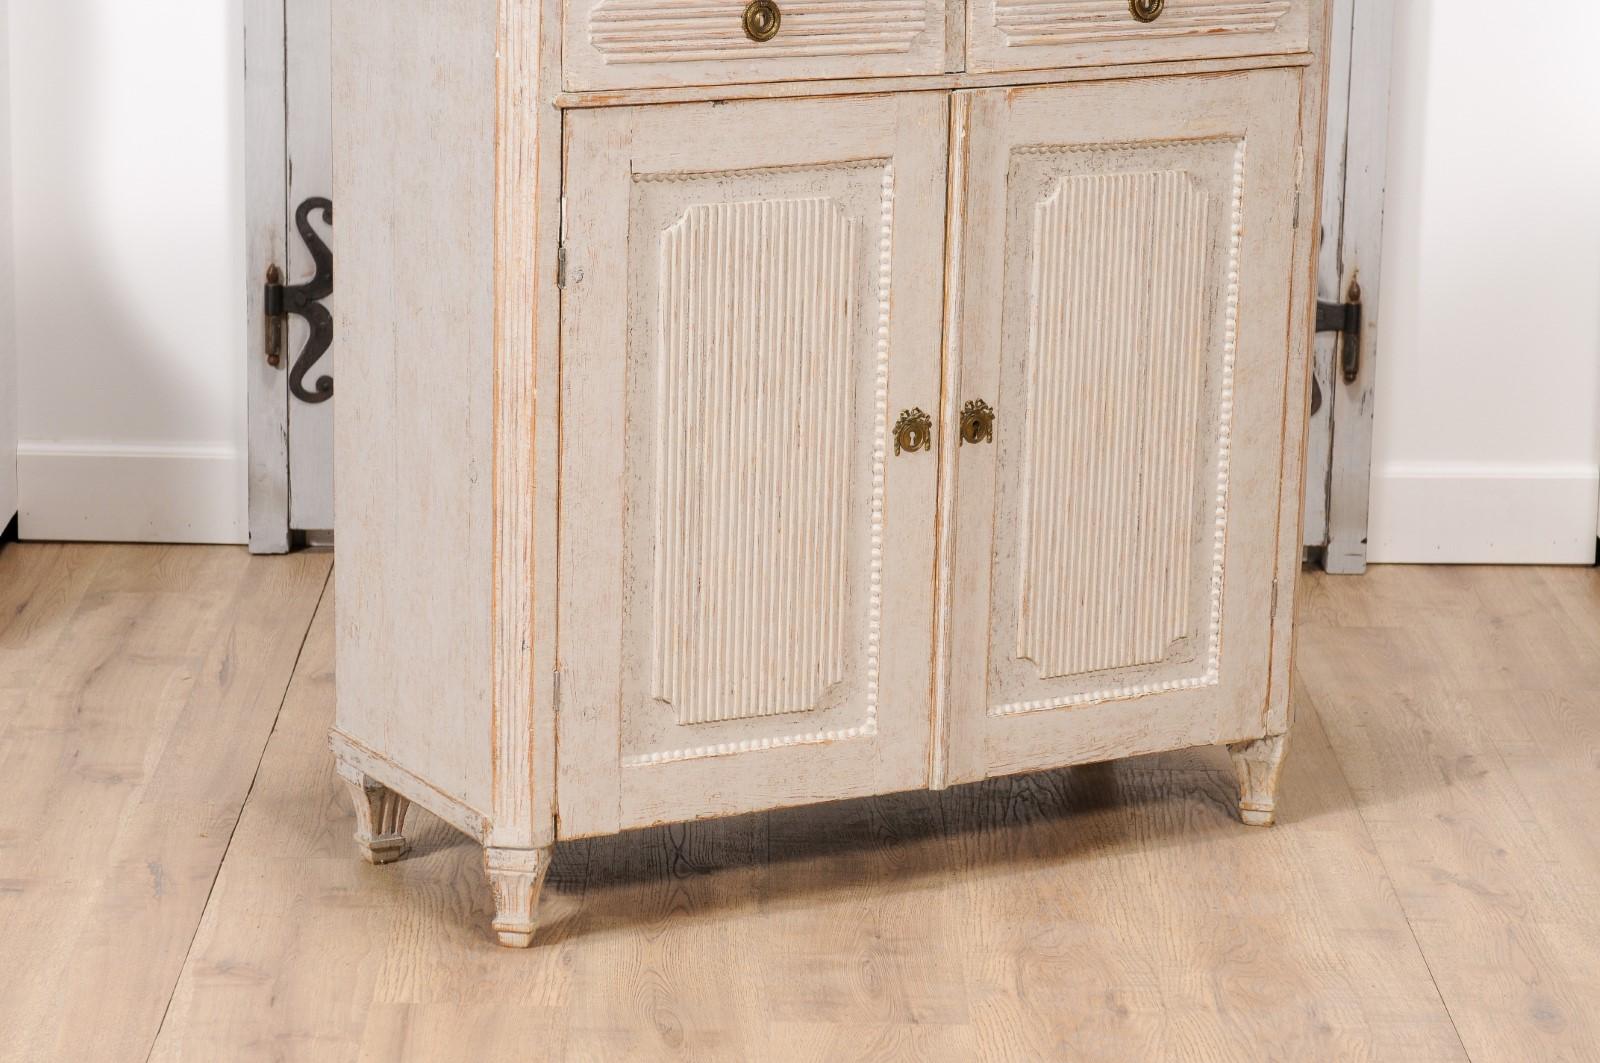 A Swedish Gustavian period painted wood buffet from circa 1820 with two drawers over two doors, carved reeded panels and tapered feet. This exquisite Swedish Gustavian period painted wood buffet from circa 1820, effortlessly marries functionality